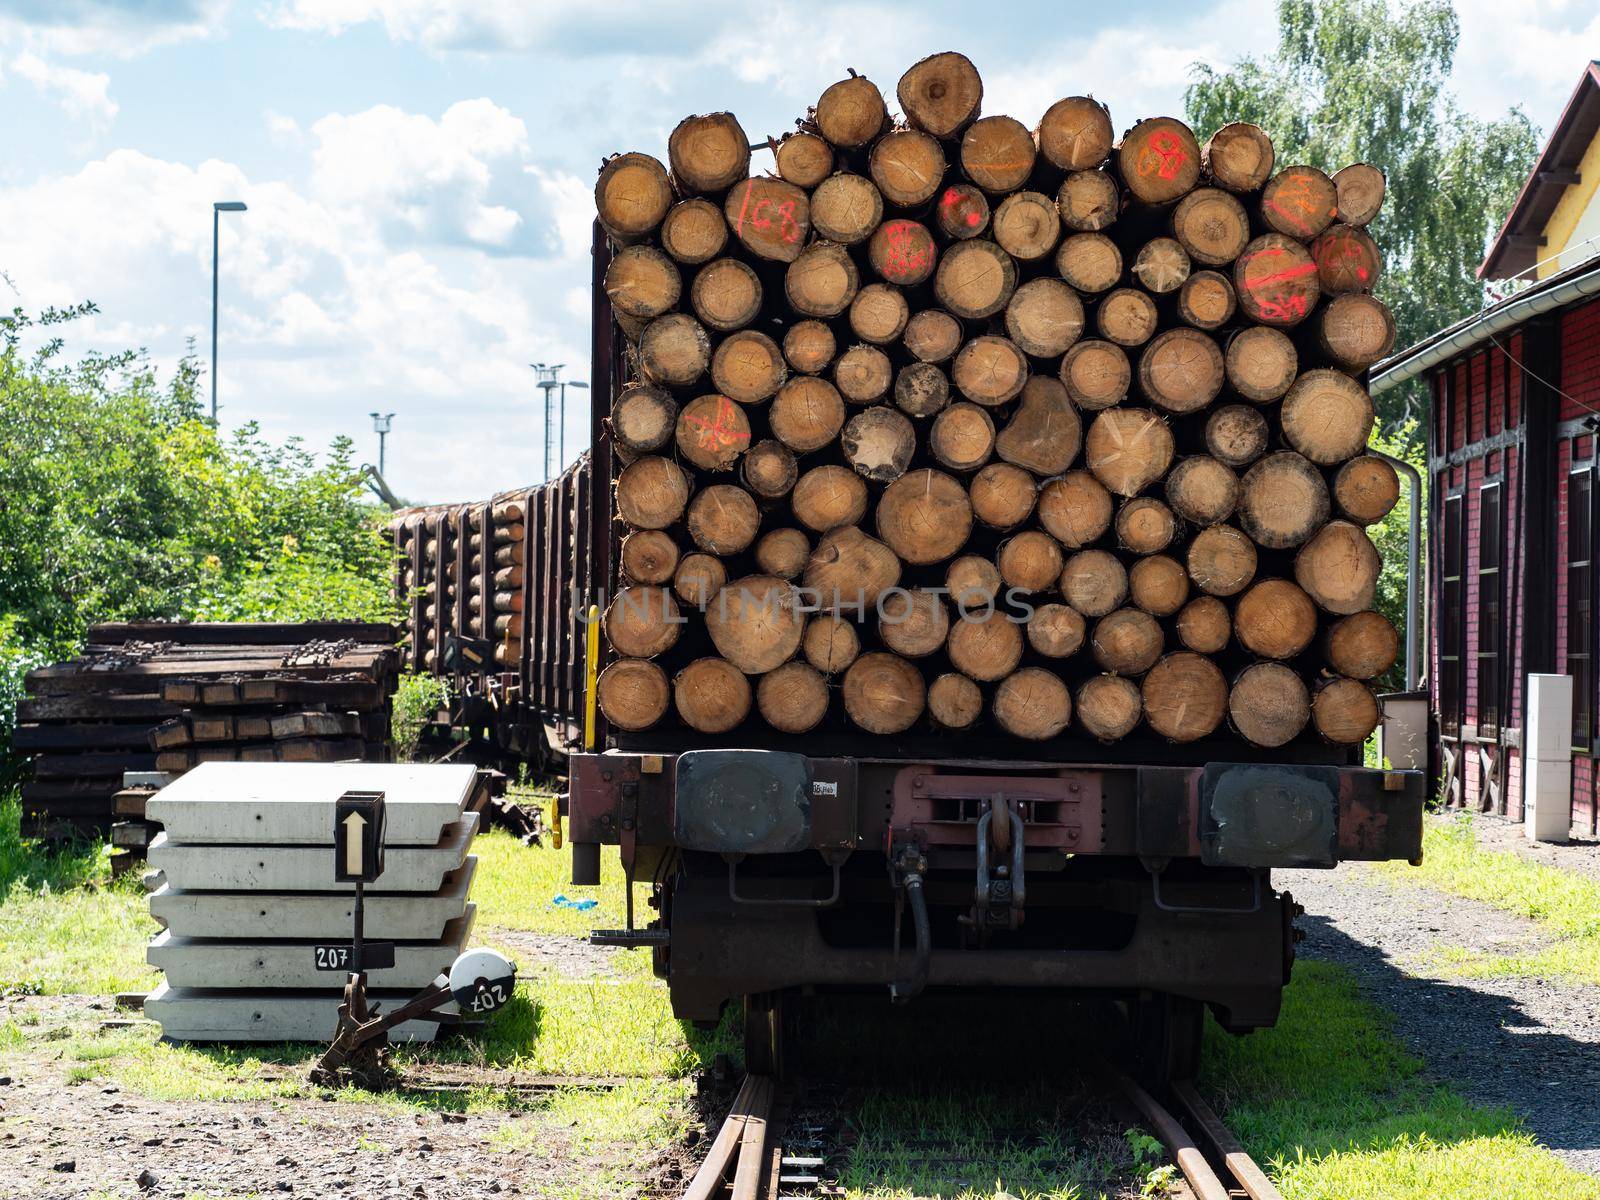 Timber transport by trail by railways. The train car stands in a depot  by rdonar2